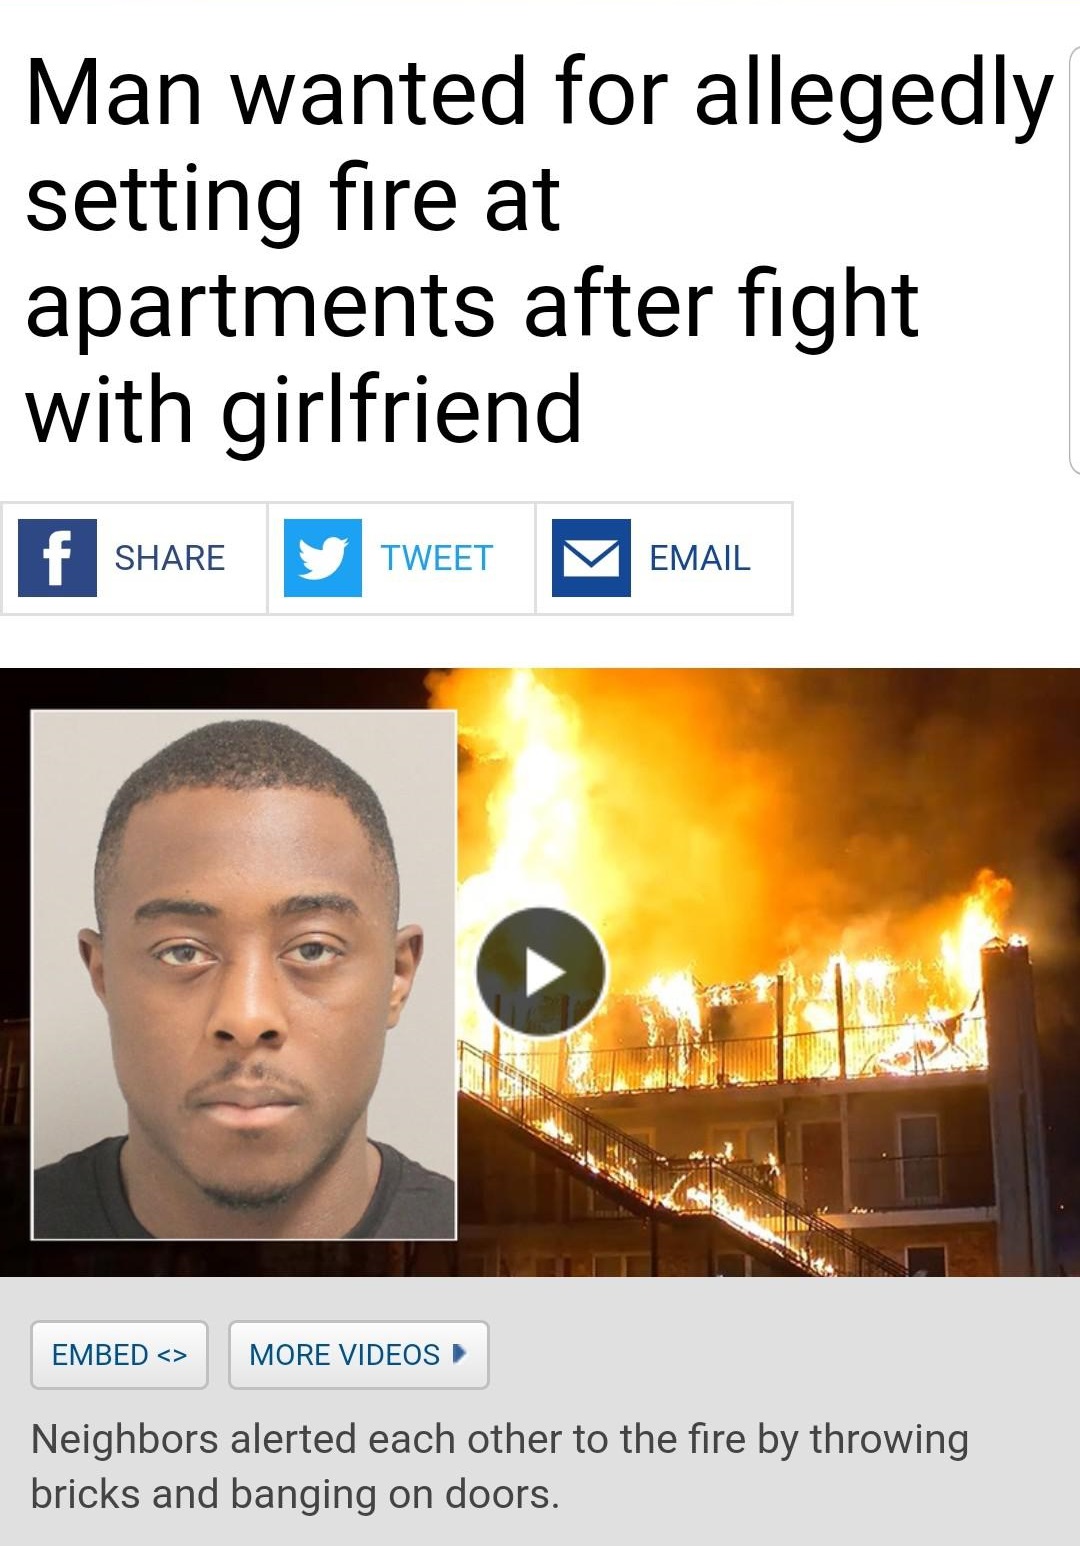 media - Man wanted for allegedly setting fire at apartments after fight with girlfriend Tweet Email Mani Embed  More Videos Neighbors alerted each other to the fire by throwing bricks and banging on doors.